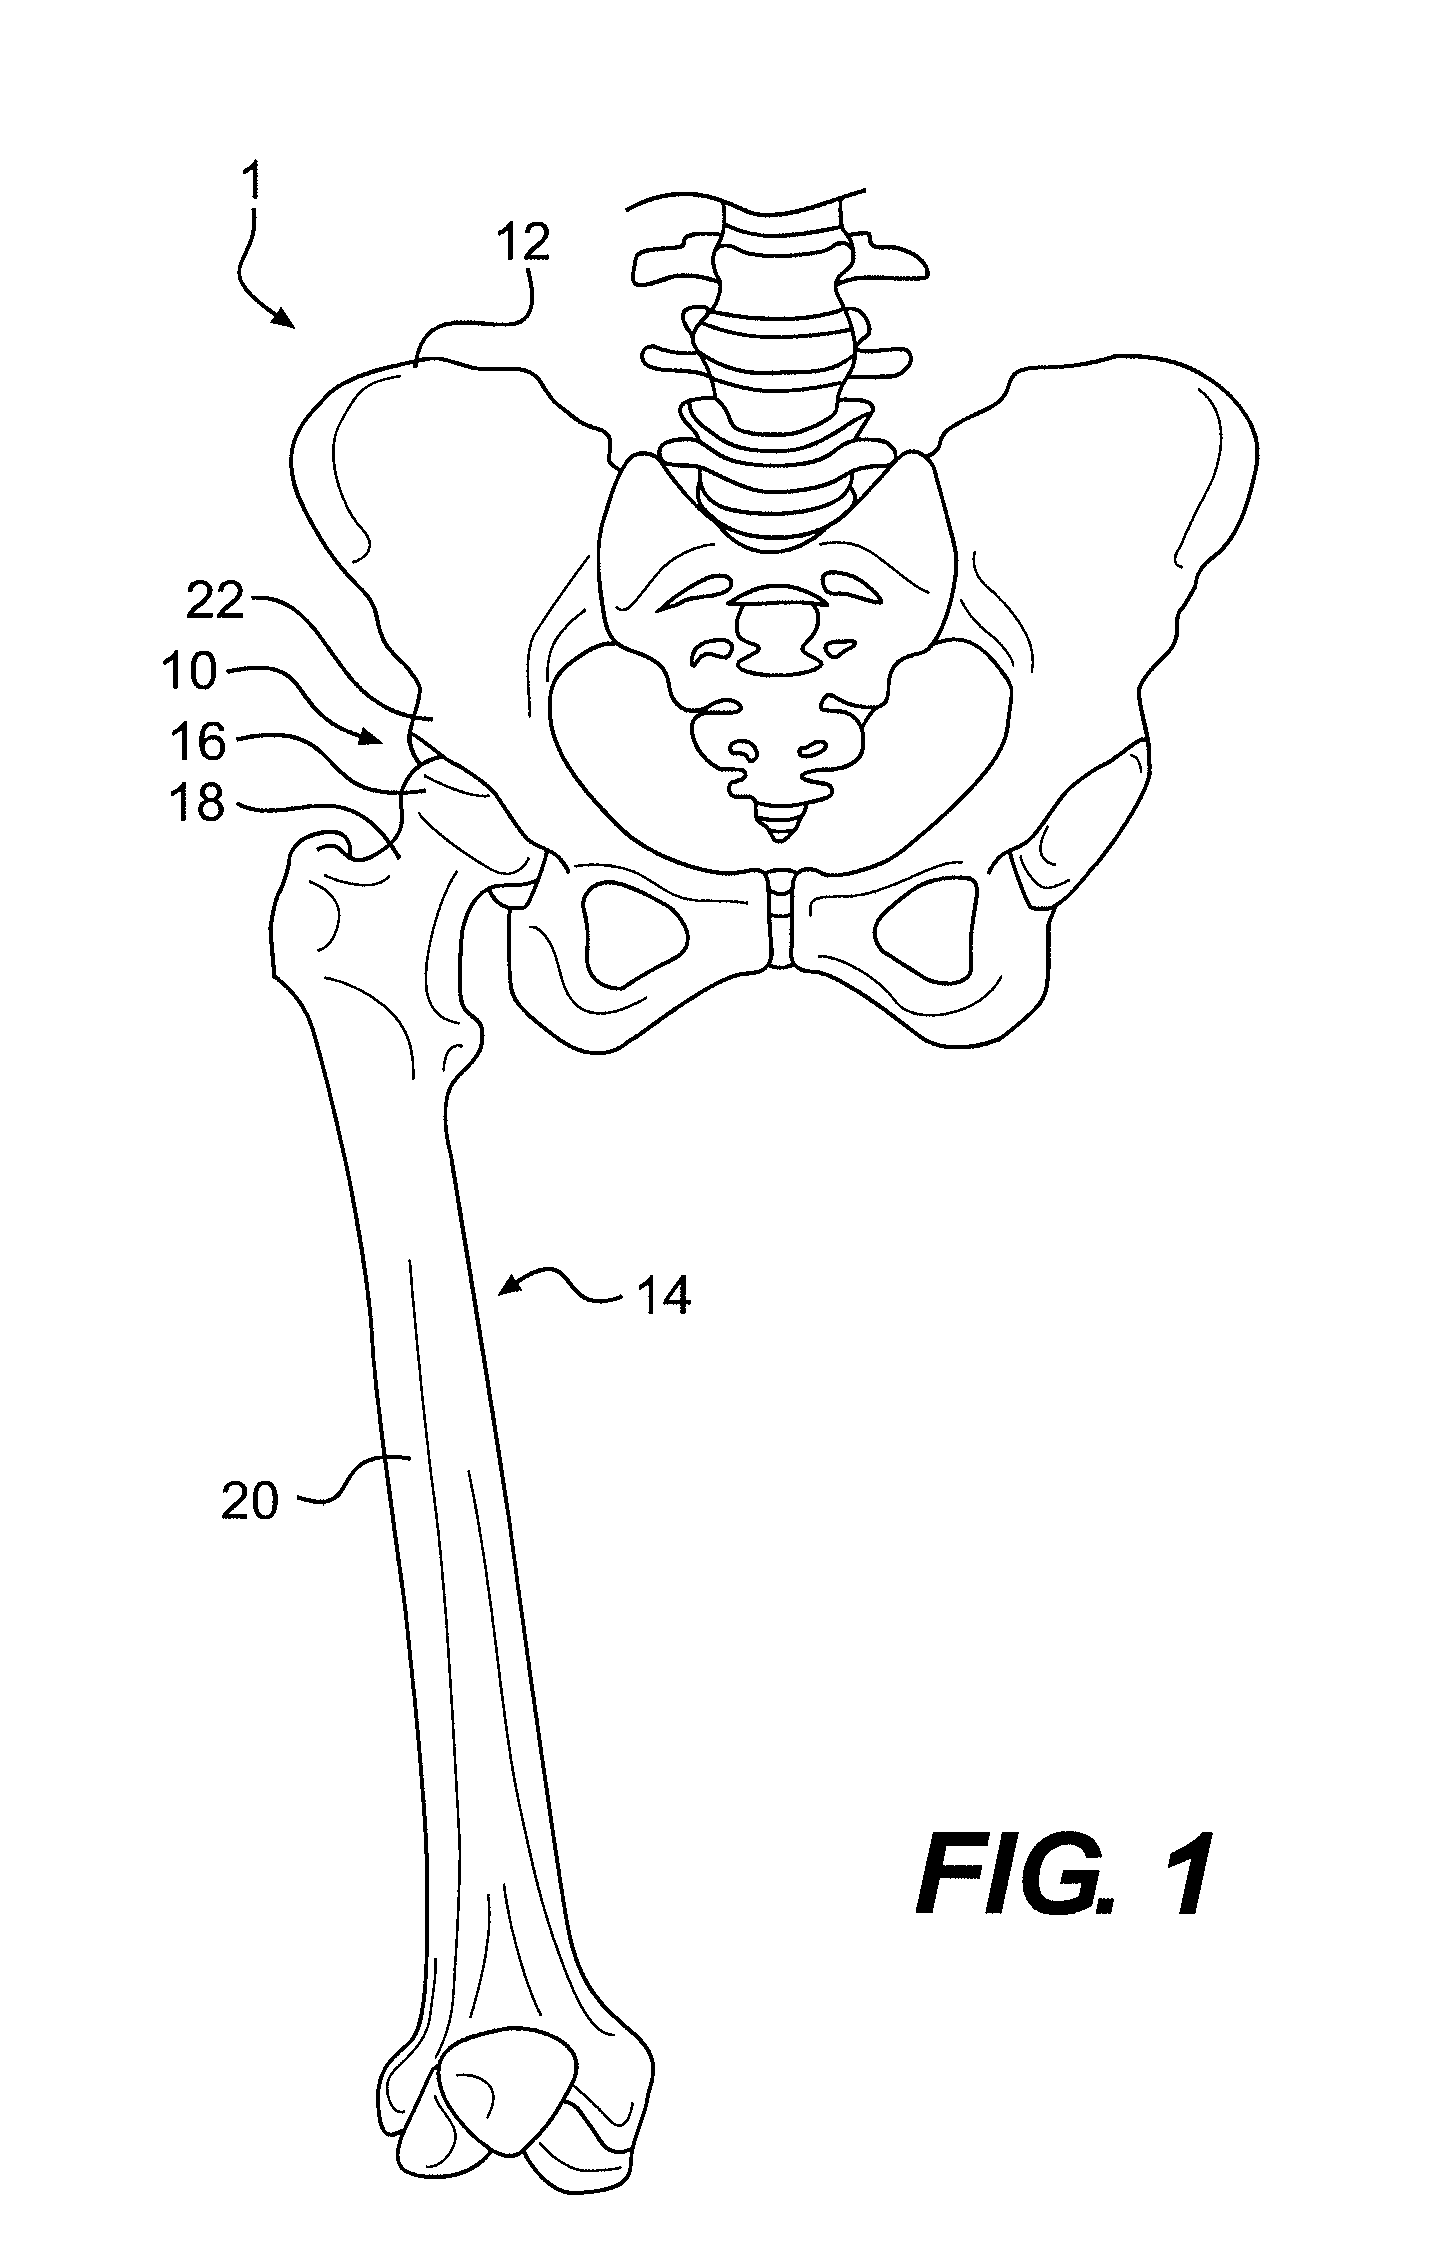 Systems and methods for measuring parameters in joint replacement surgery